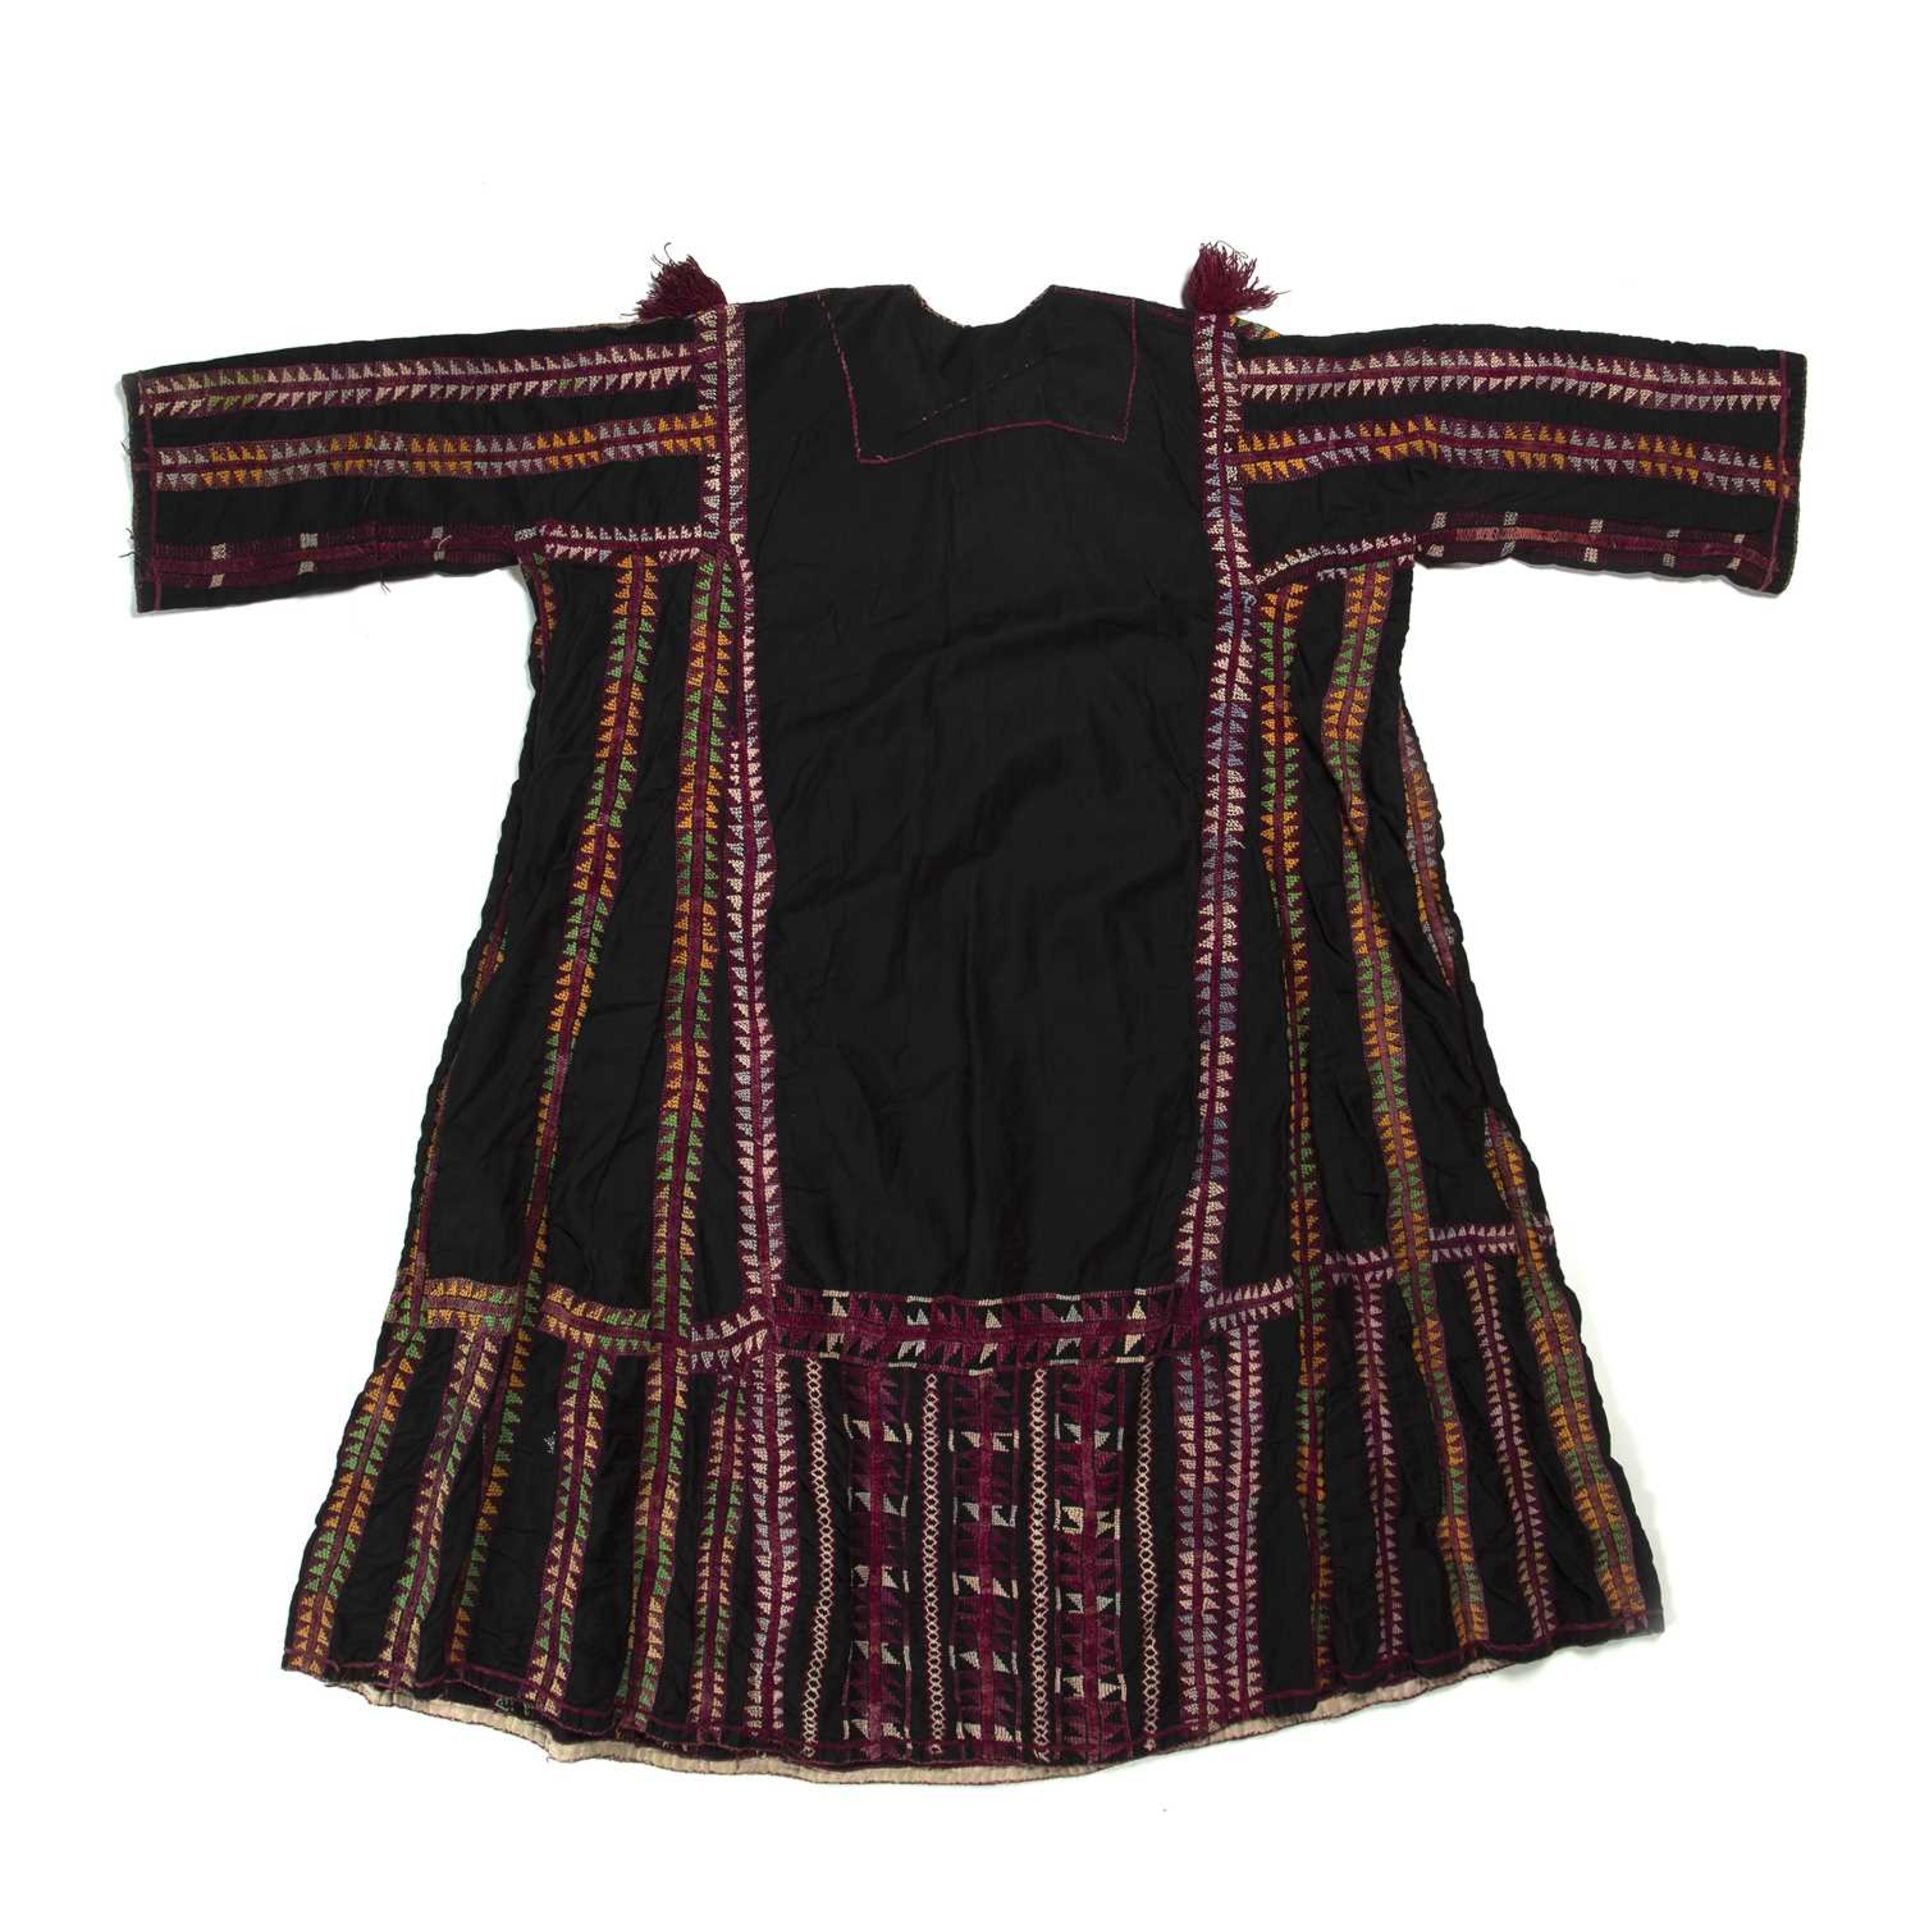 Black ground dress Palestinian with geometric embroidered borders in yellow, green and purple, - Image 2 of 2